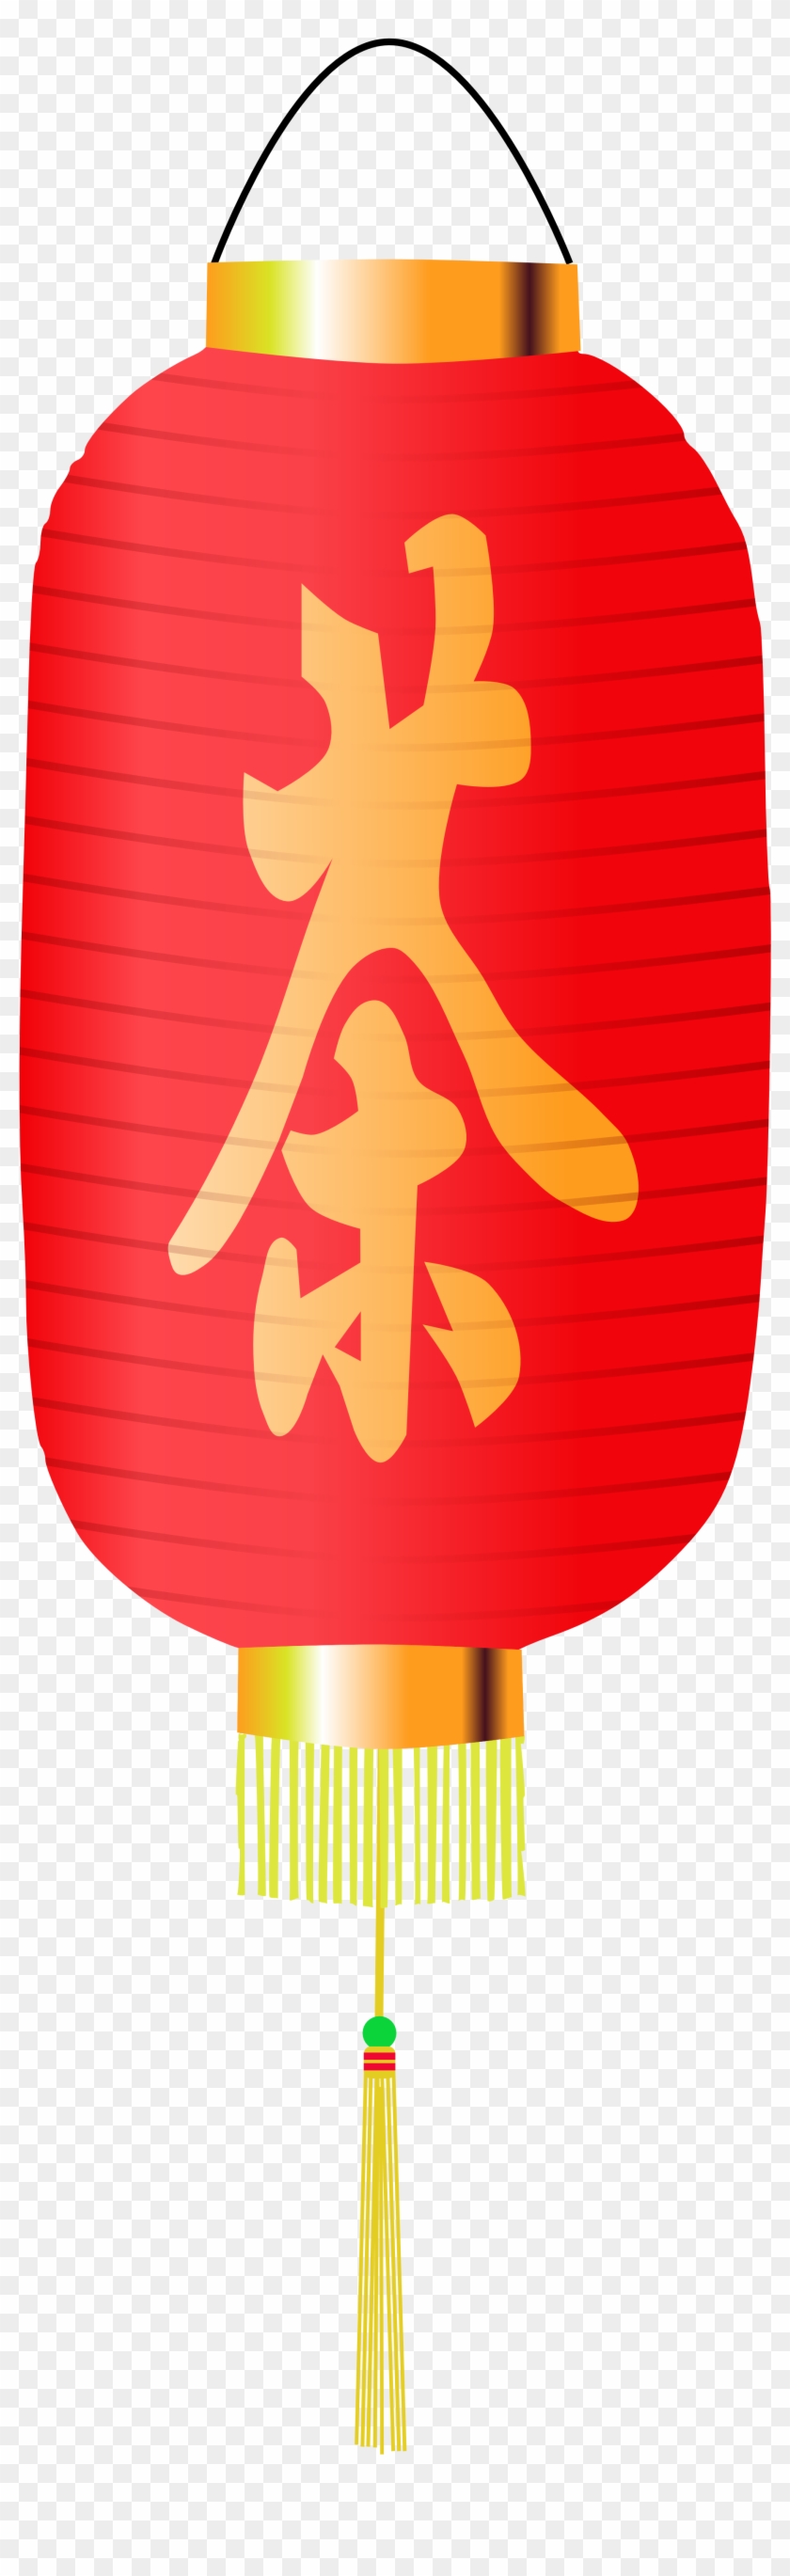 Chinese New Year Clipart - Chinese Lantern Clip Art #130322